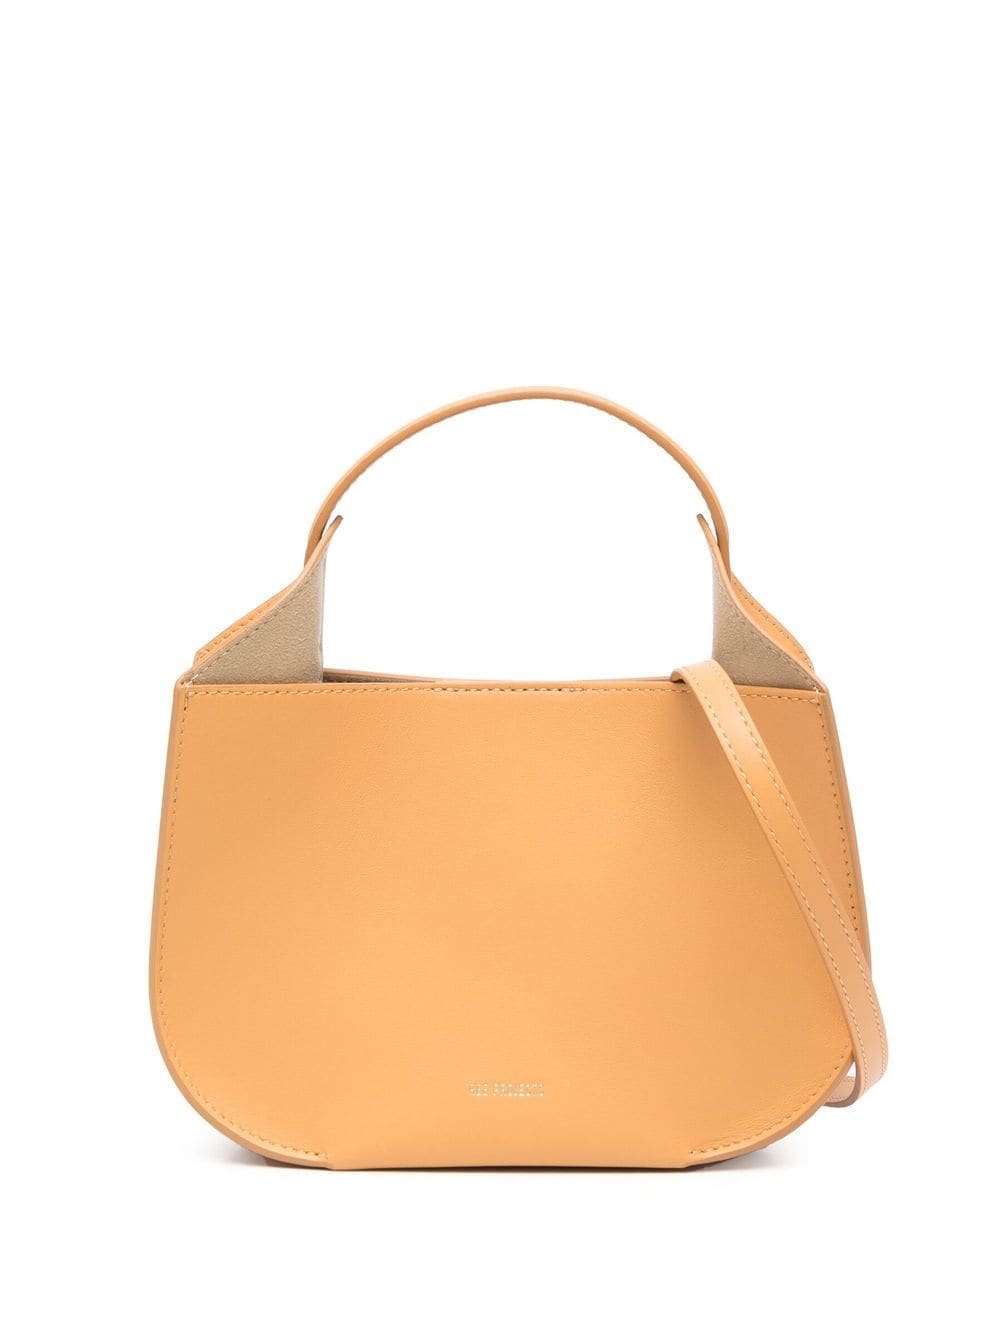 Ree Projects REE PROJECTS- Helene Leather Mini Crossbody Bag